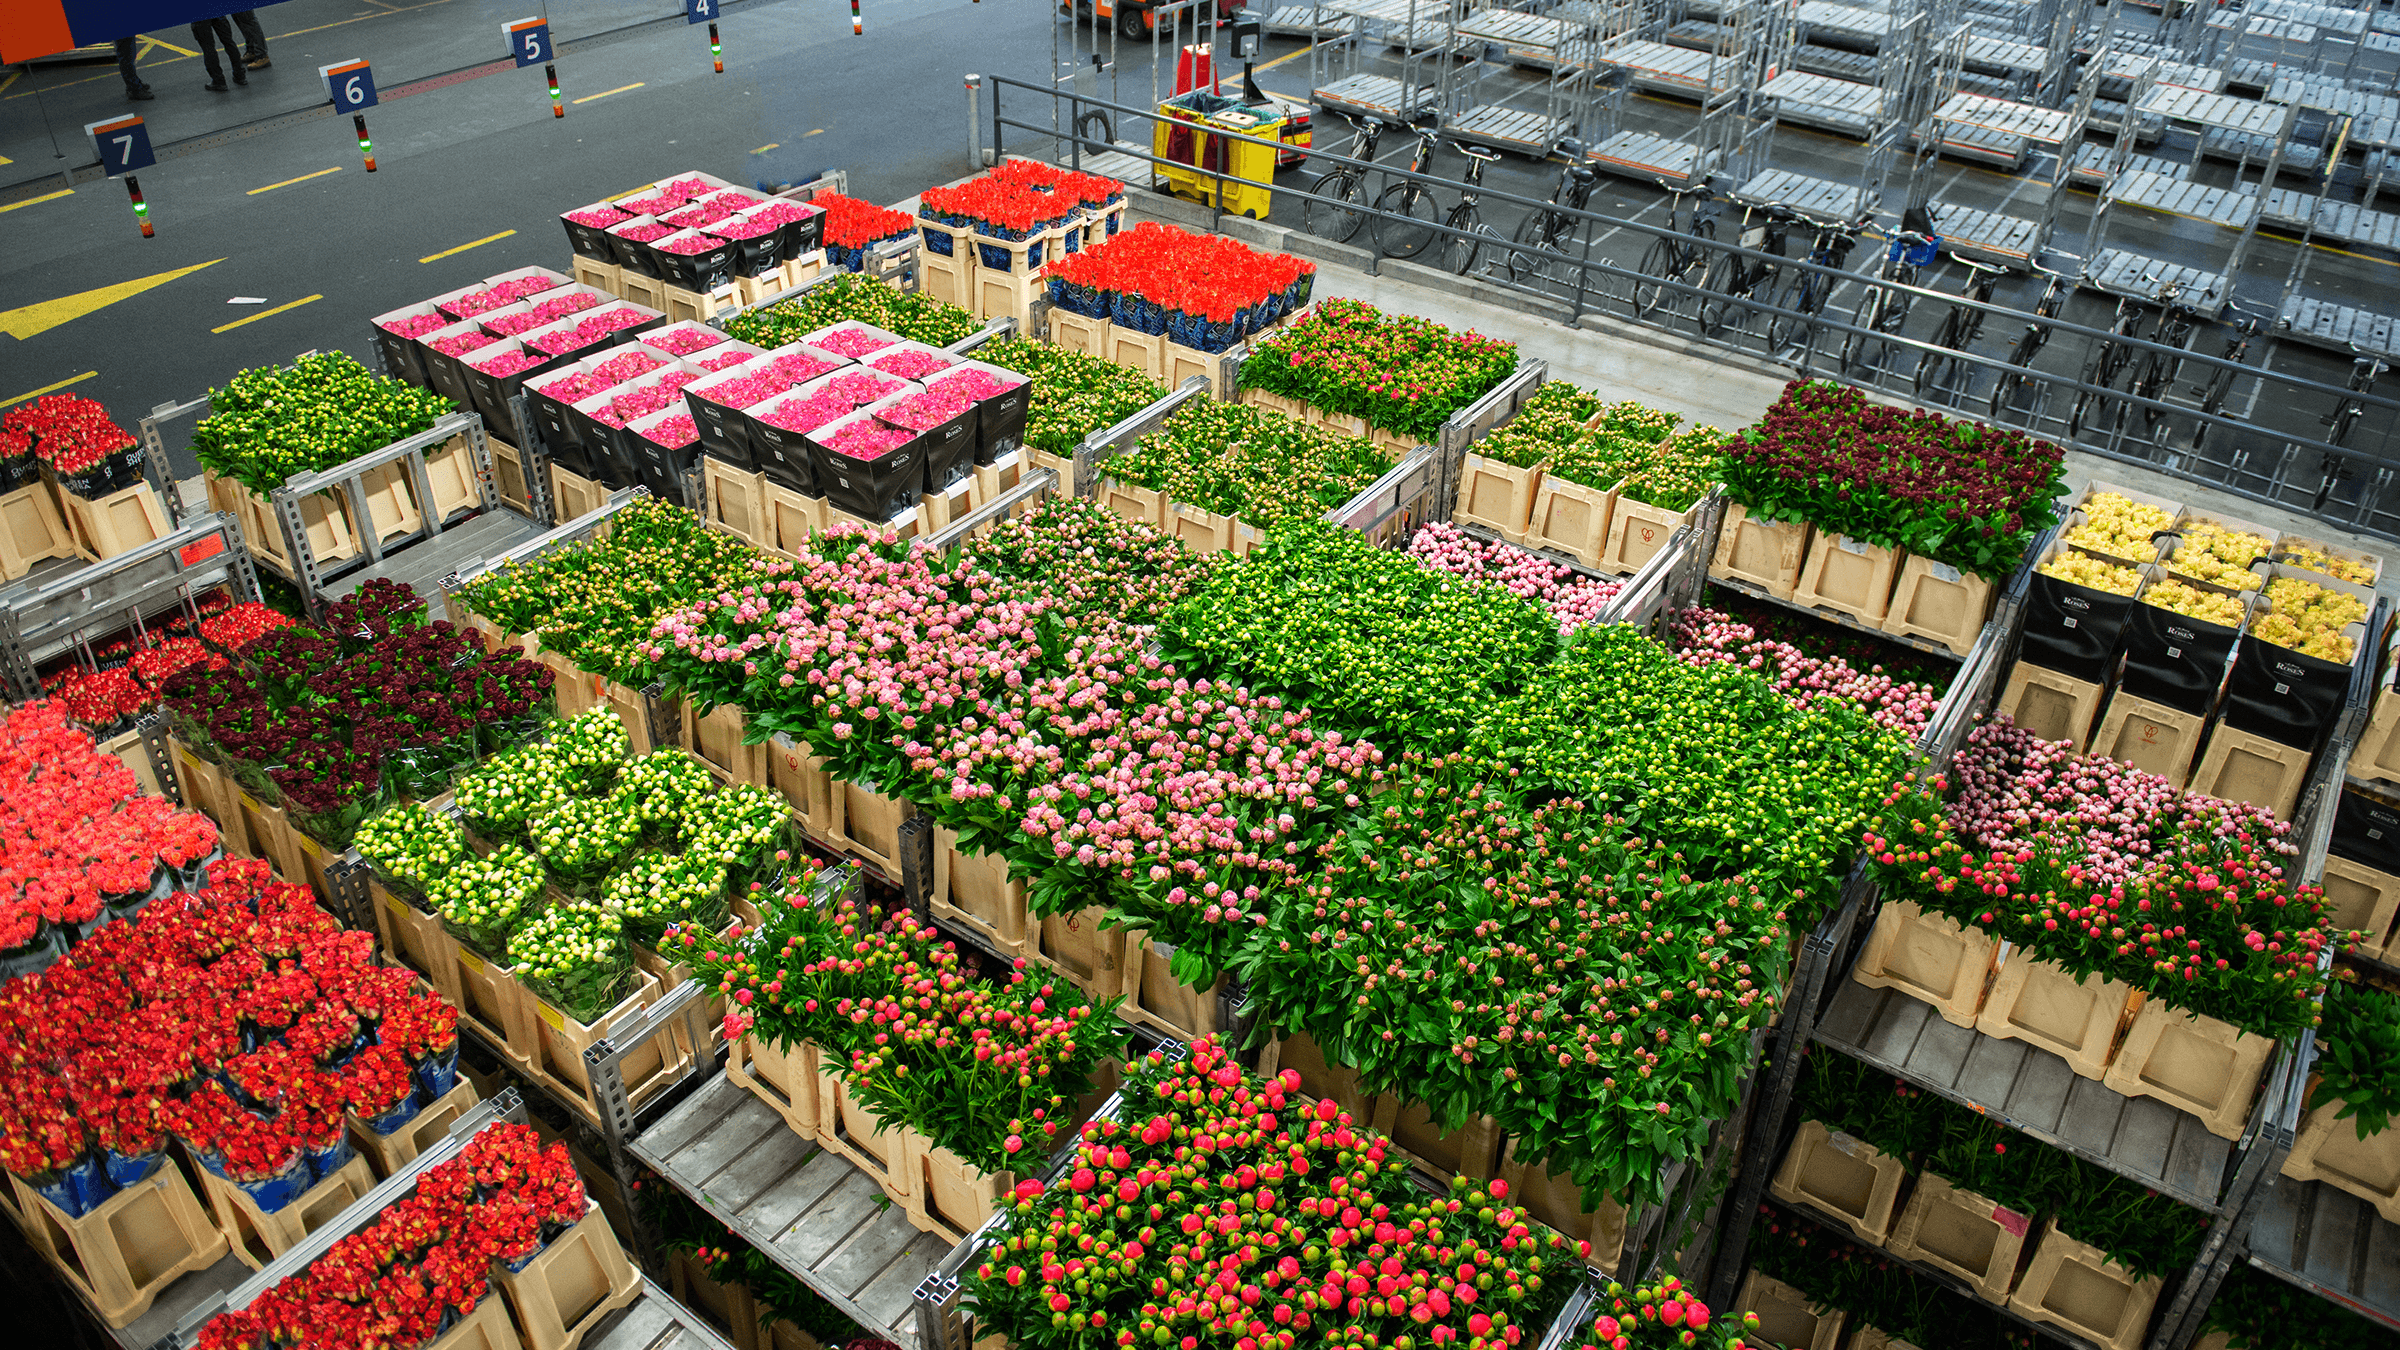 Boxes of colourful flowers in a Dutch warehouse